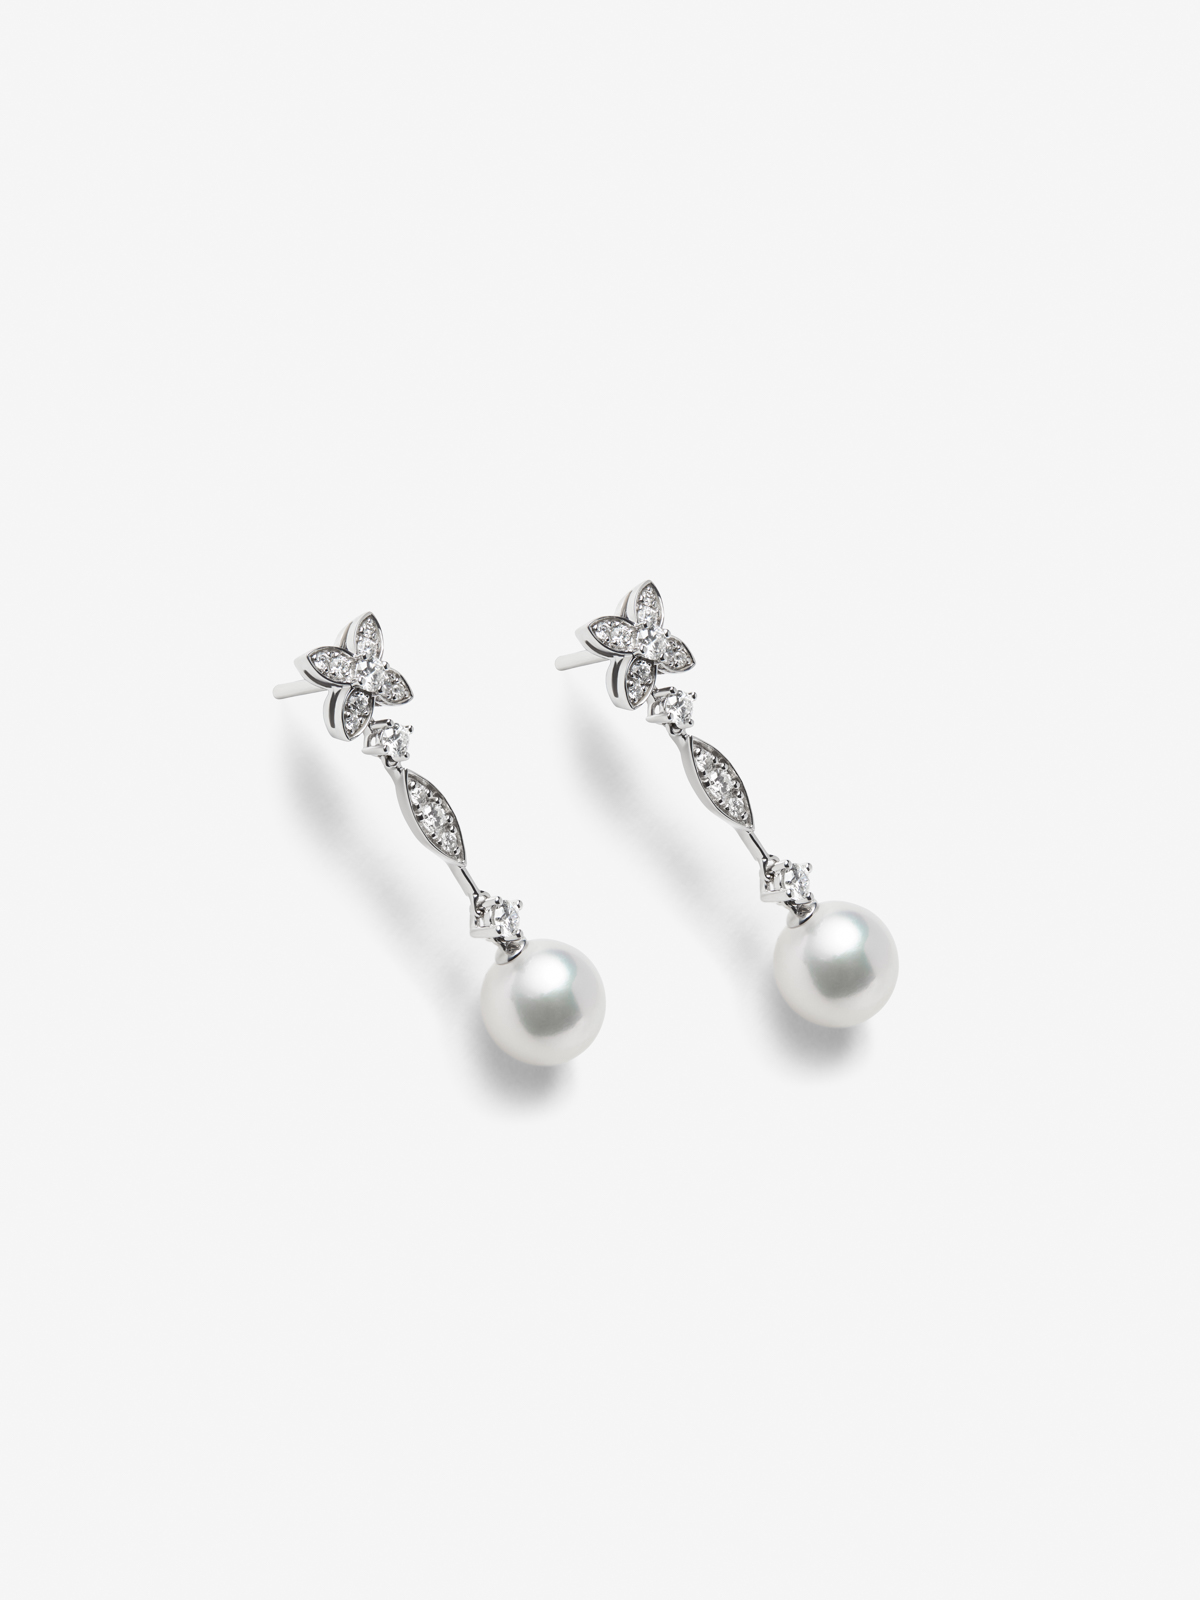 18K White Gold Earrings With Bright Size of 0.99 CTS and 8.5 mm pearls